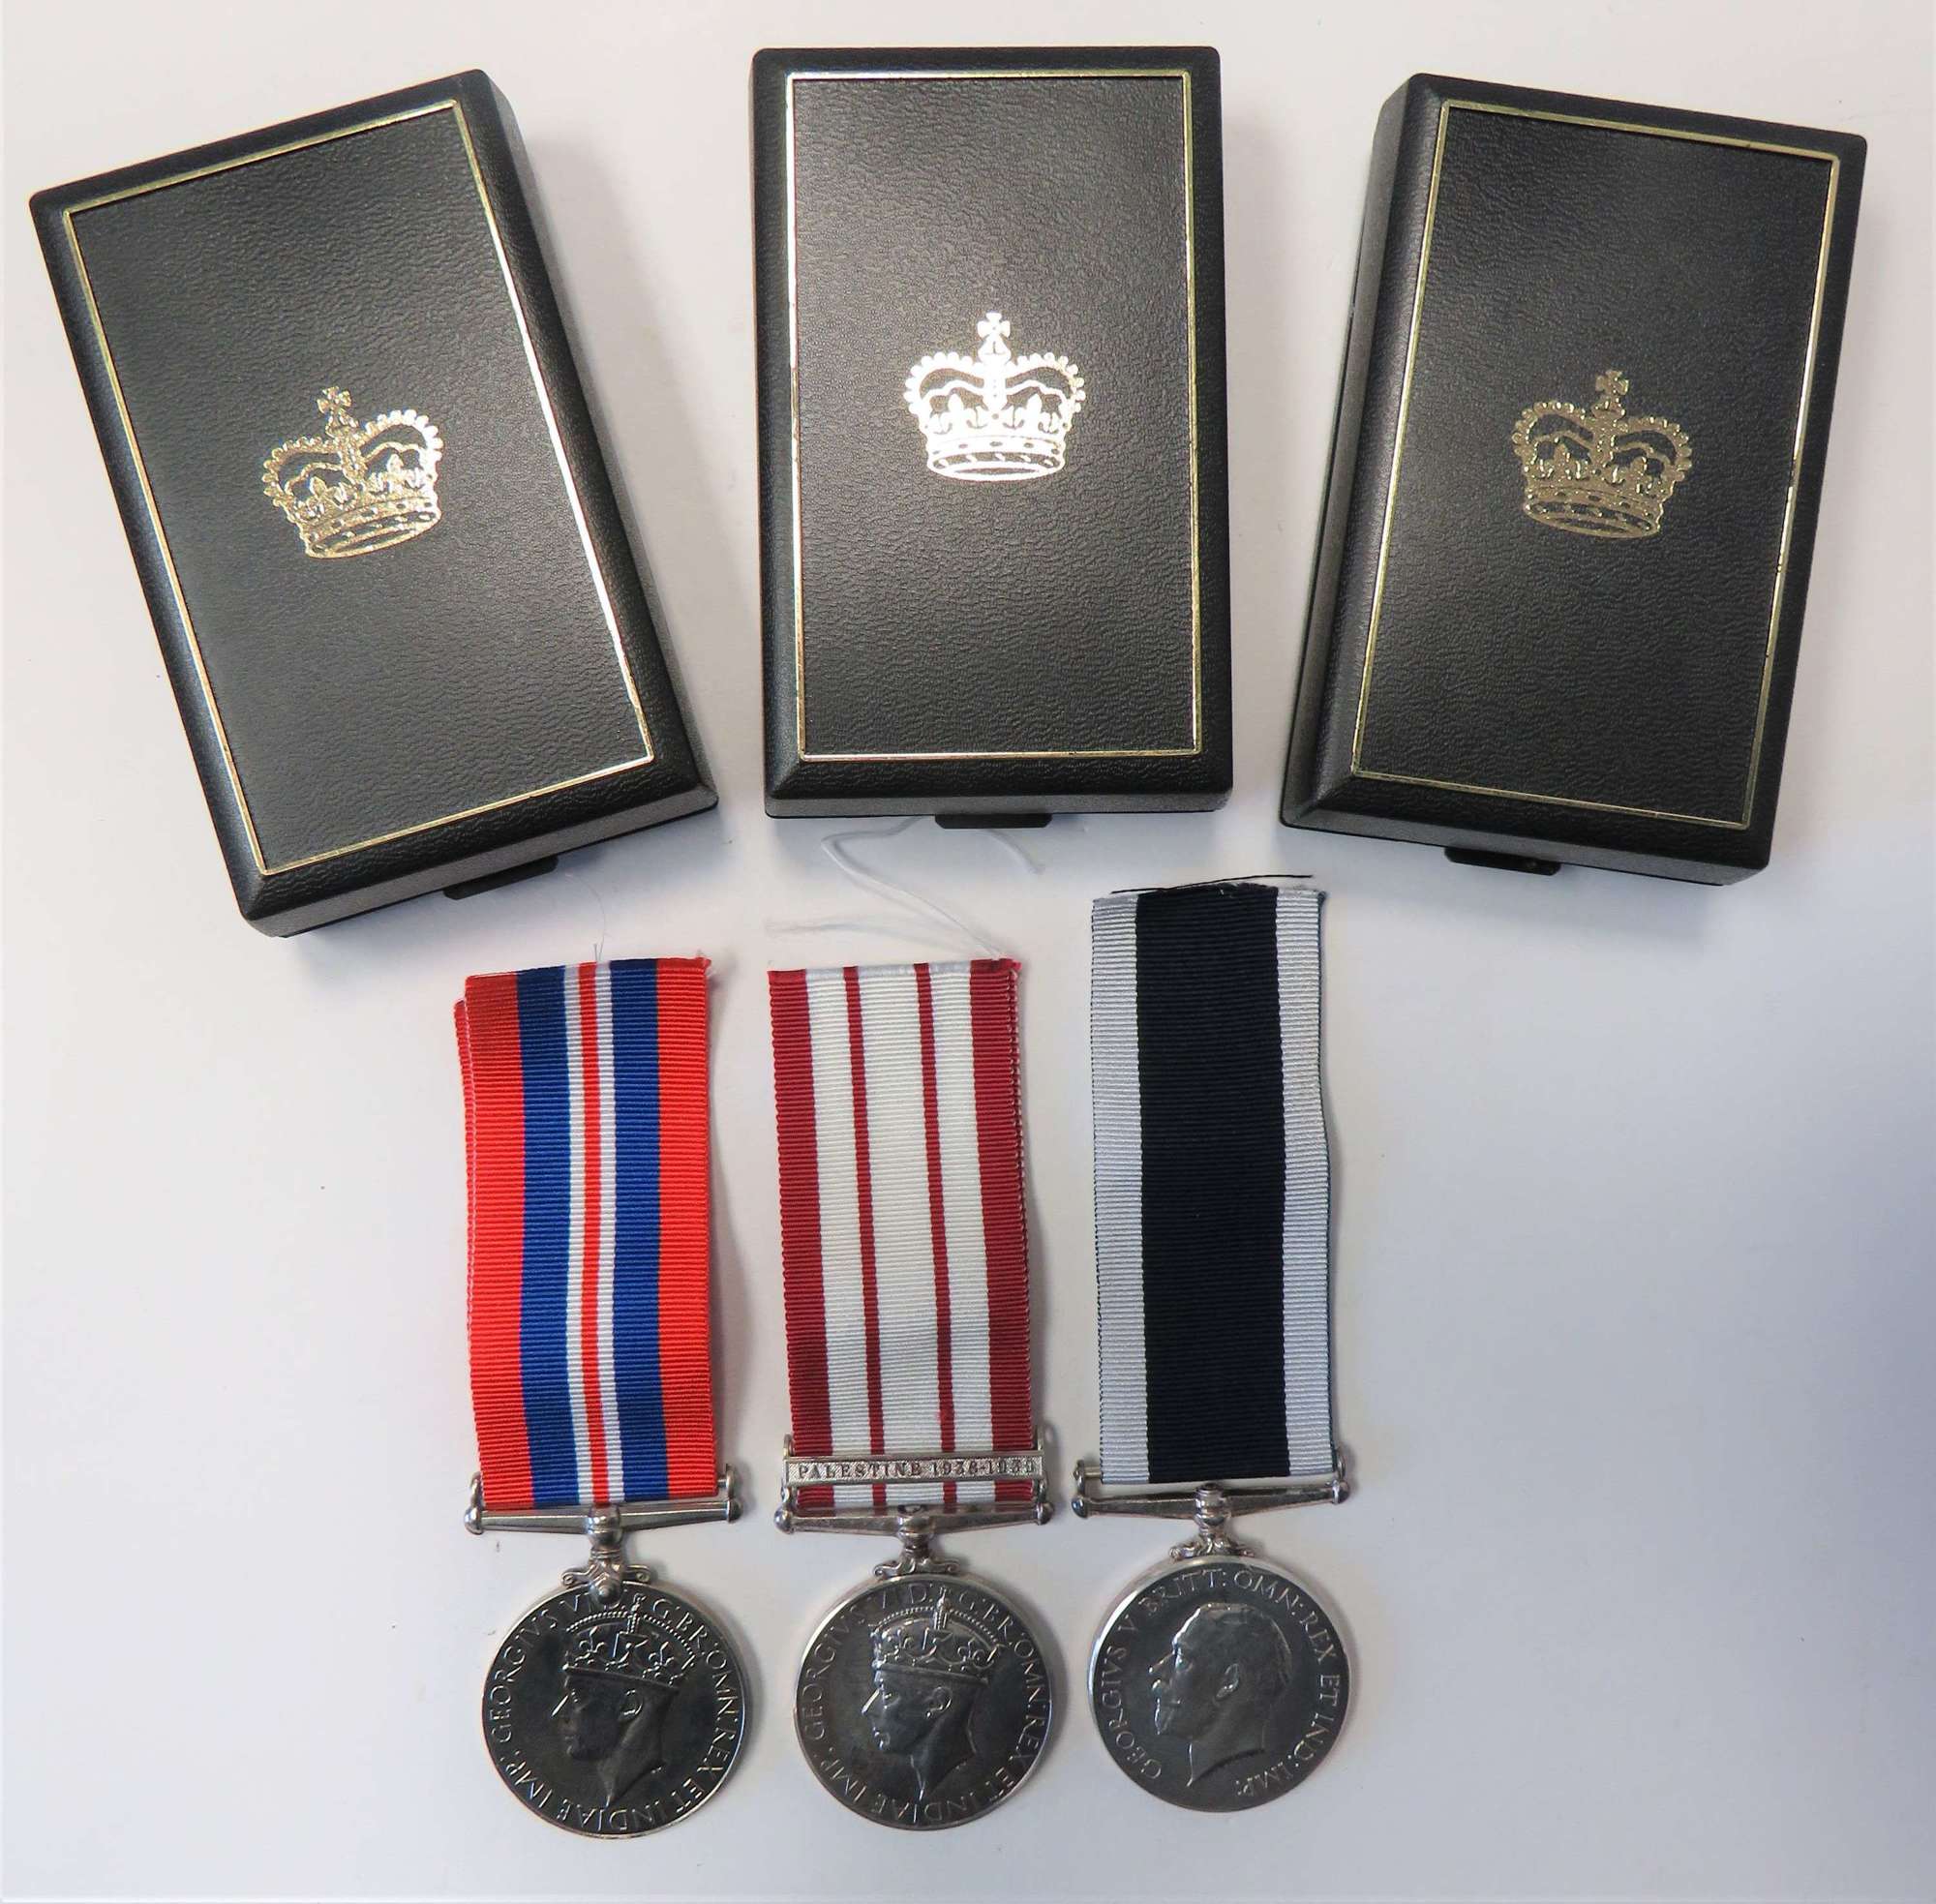 Late Re-issue Royal Naval LS&GC Medal GSM Medal Group